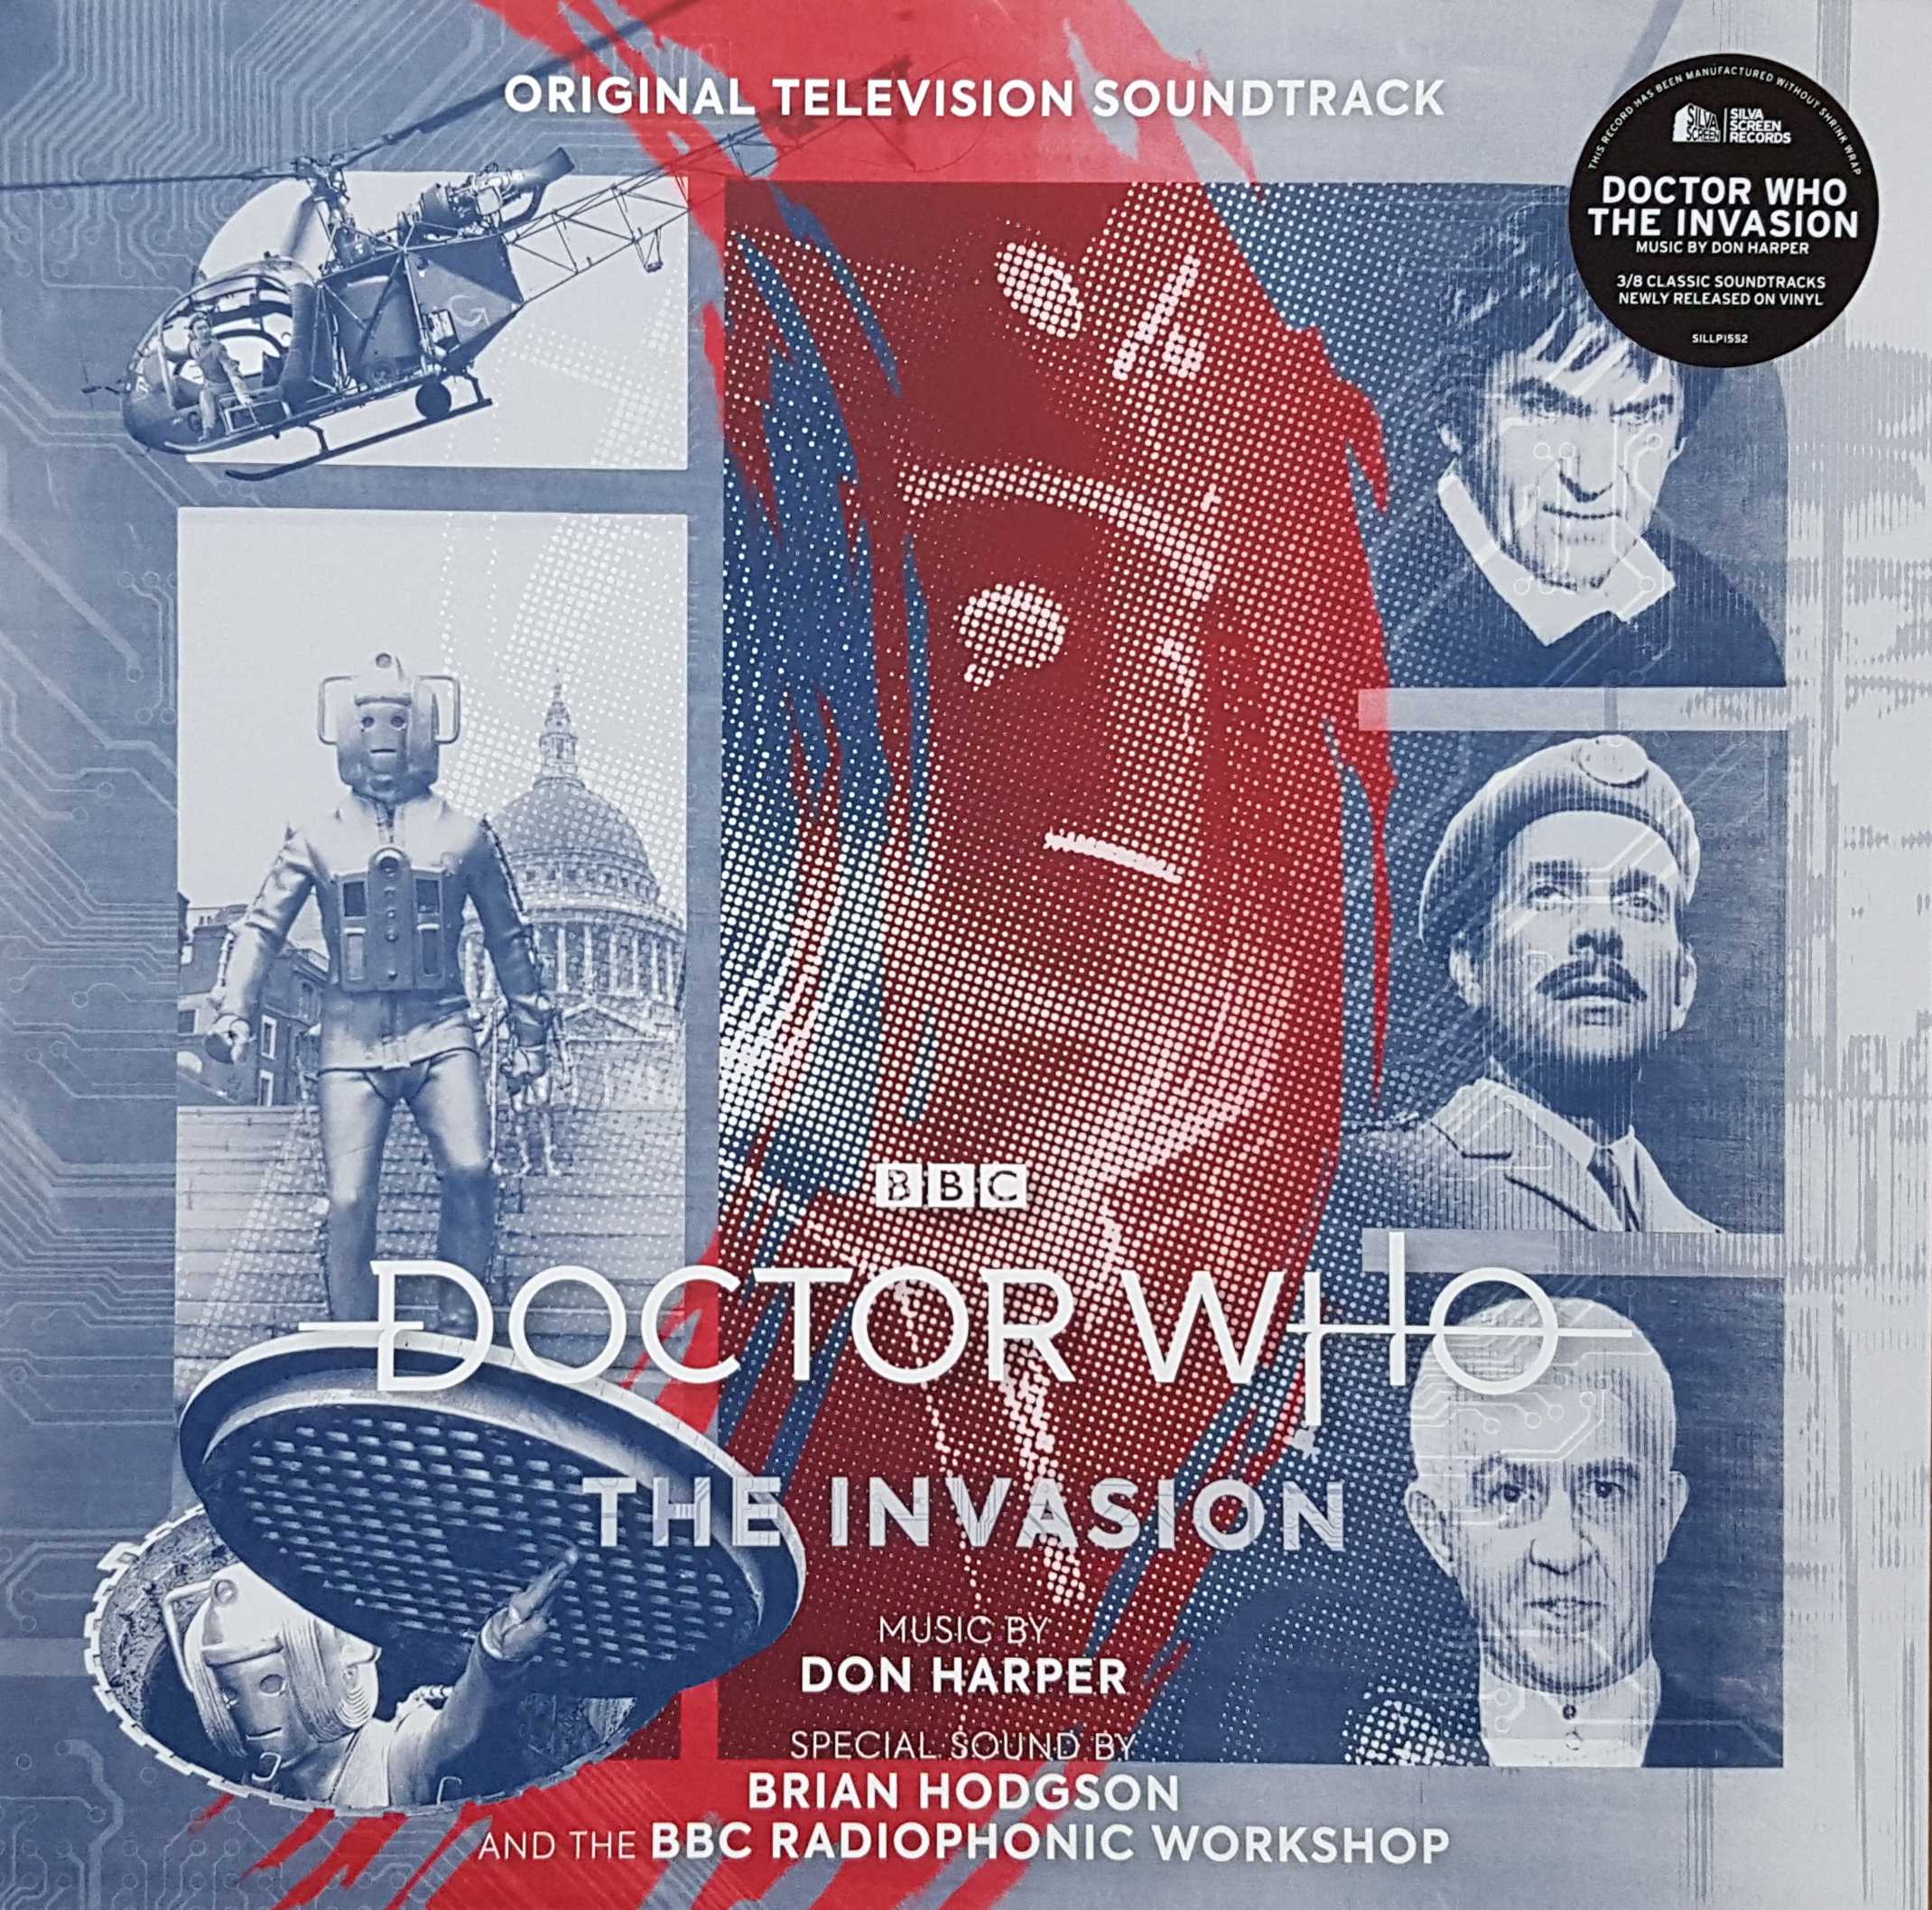 Picture of SILLP 1552 Doctor Who - The invasion by artist Don Harper / Brian Hodgson and the BBC Radiophonic Workshop from the BBC albums - Records and Tapes library